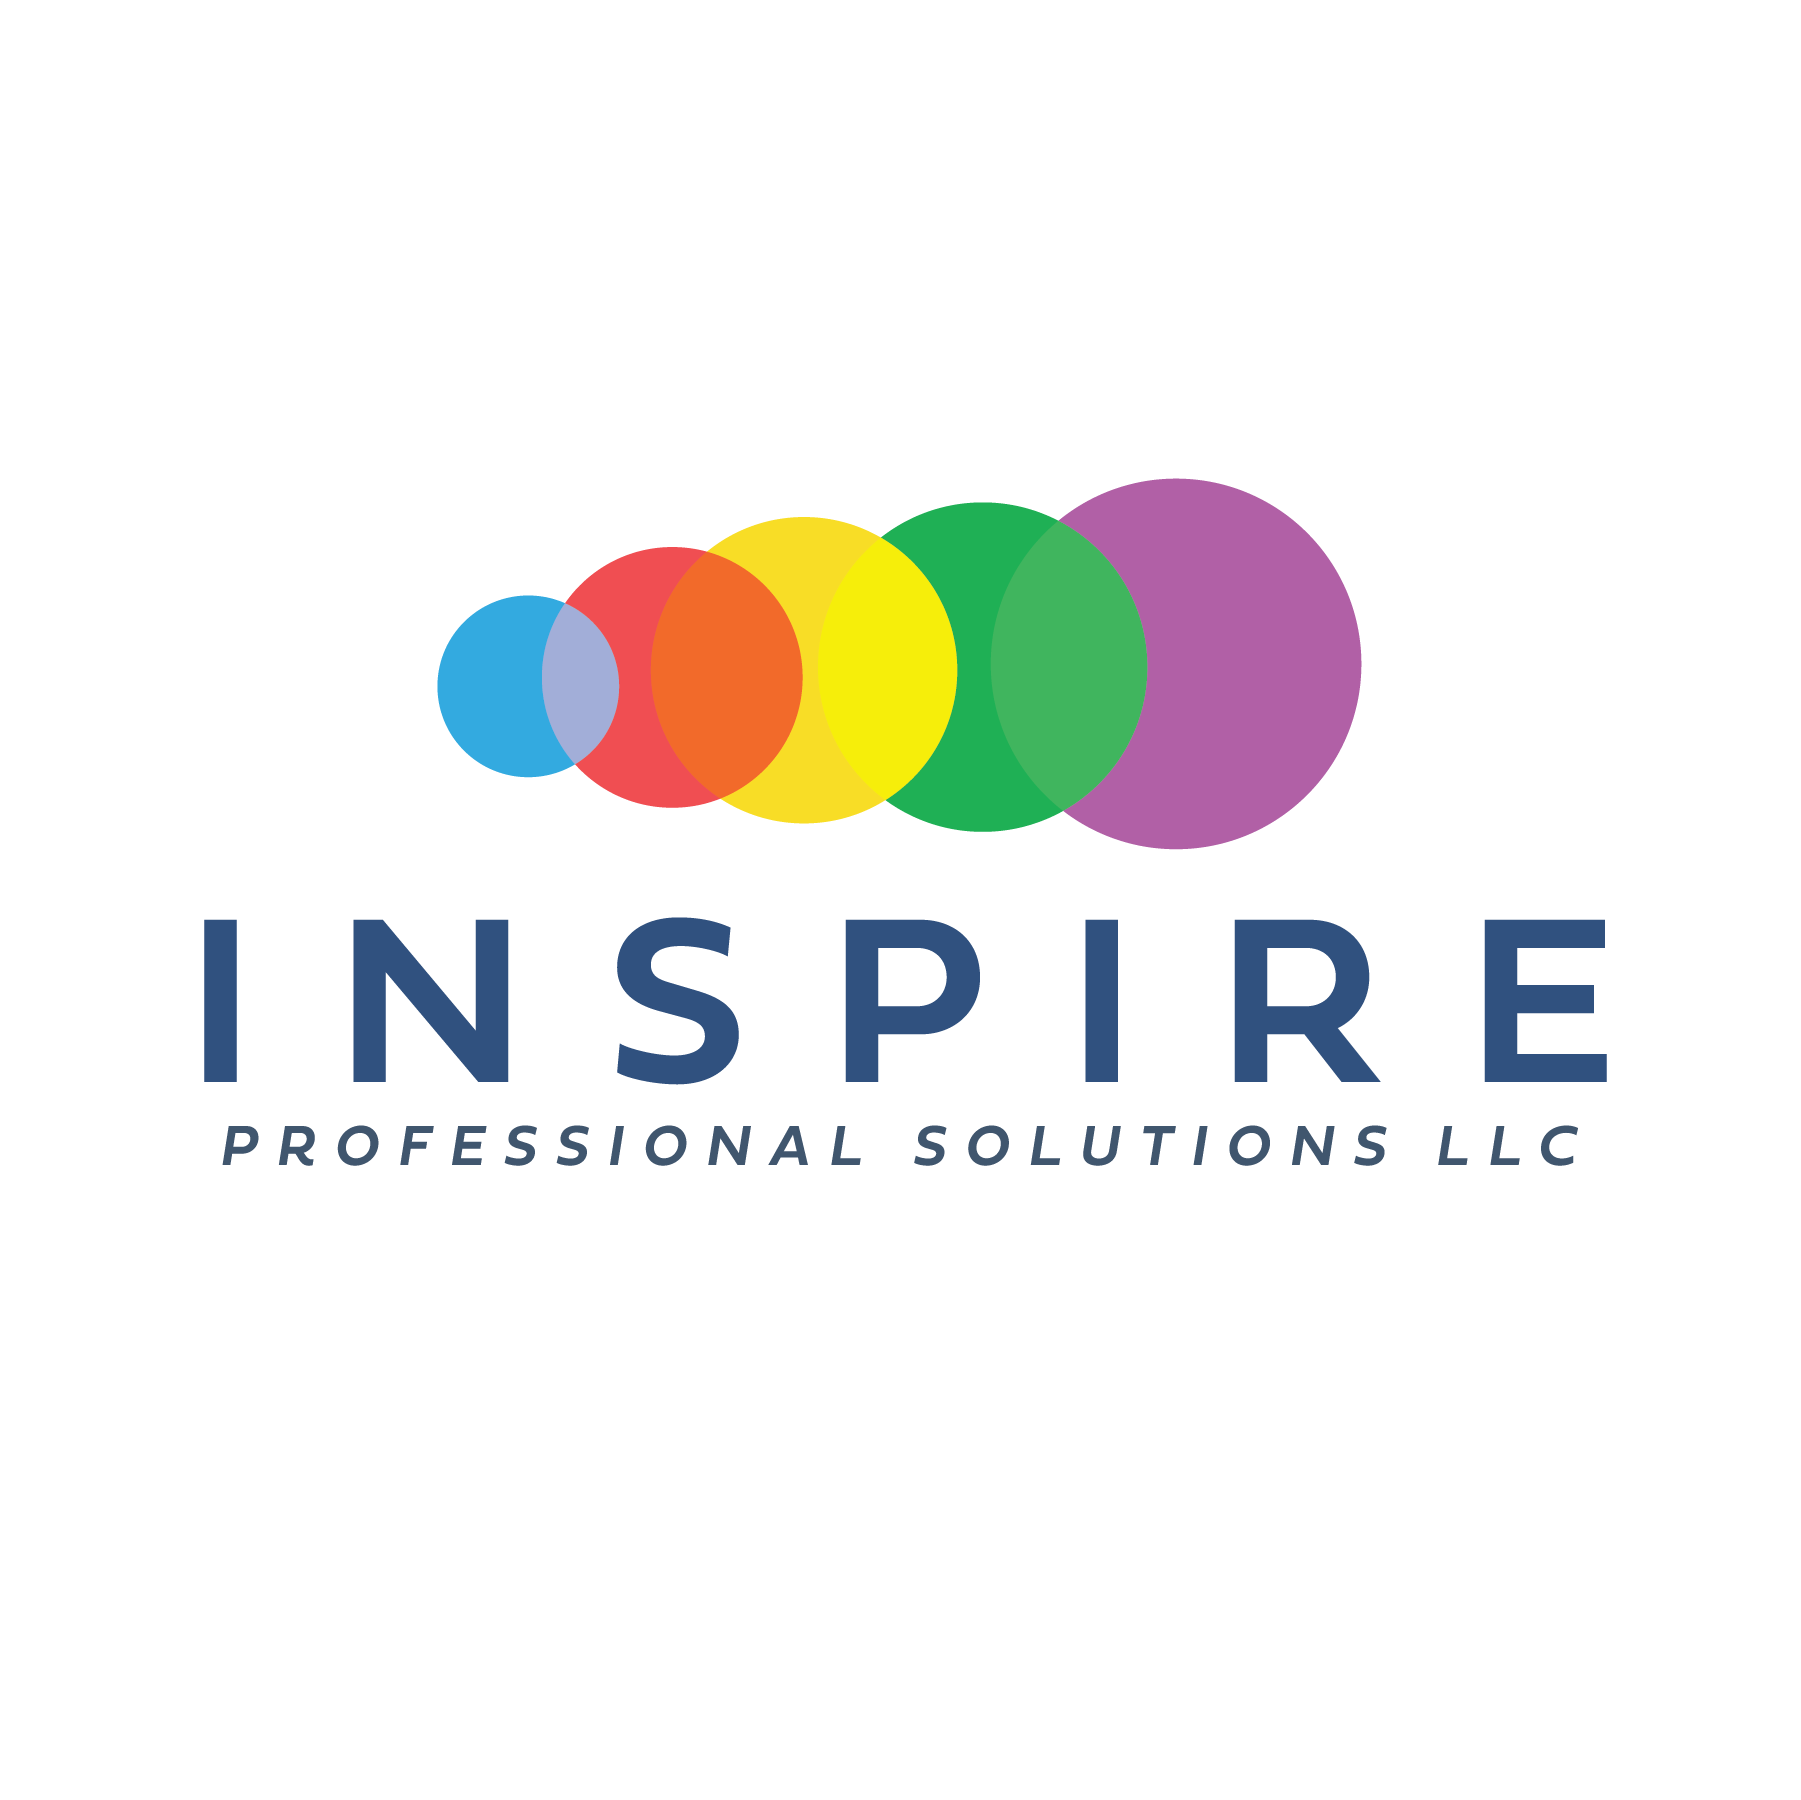 Inspire Professional Solutions